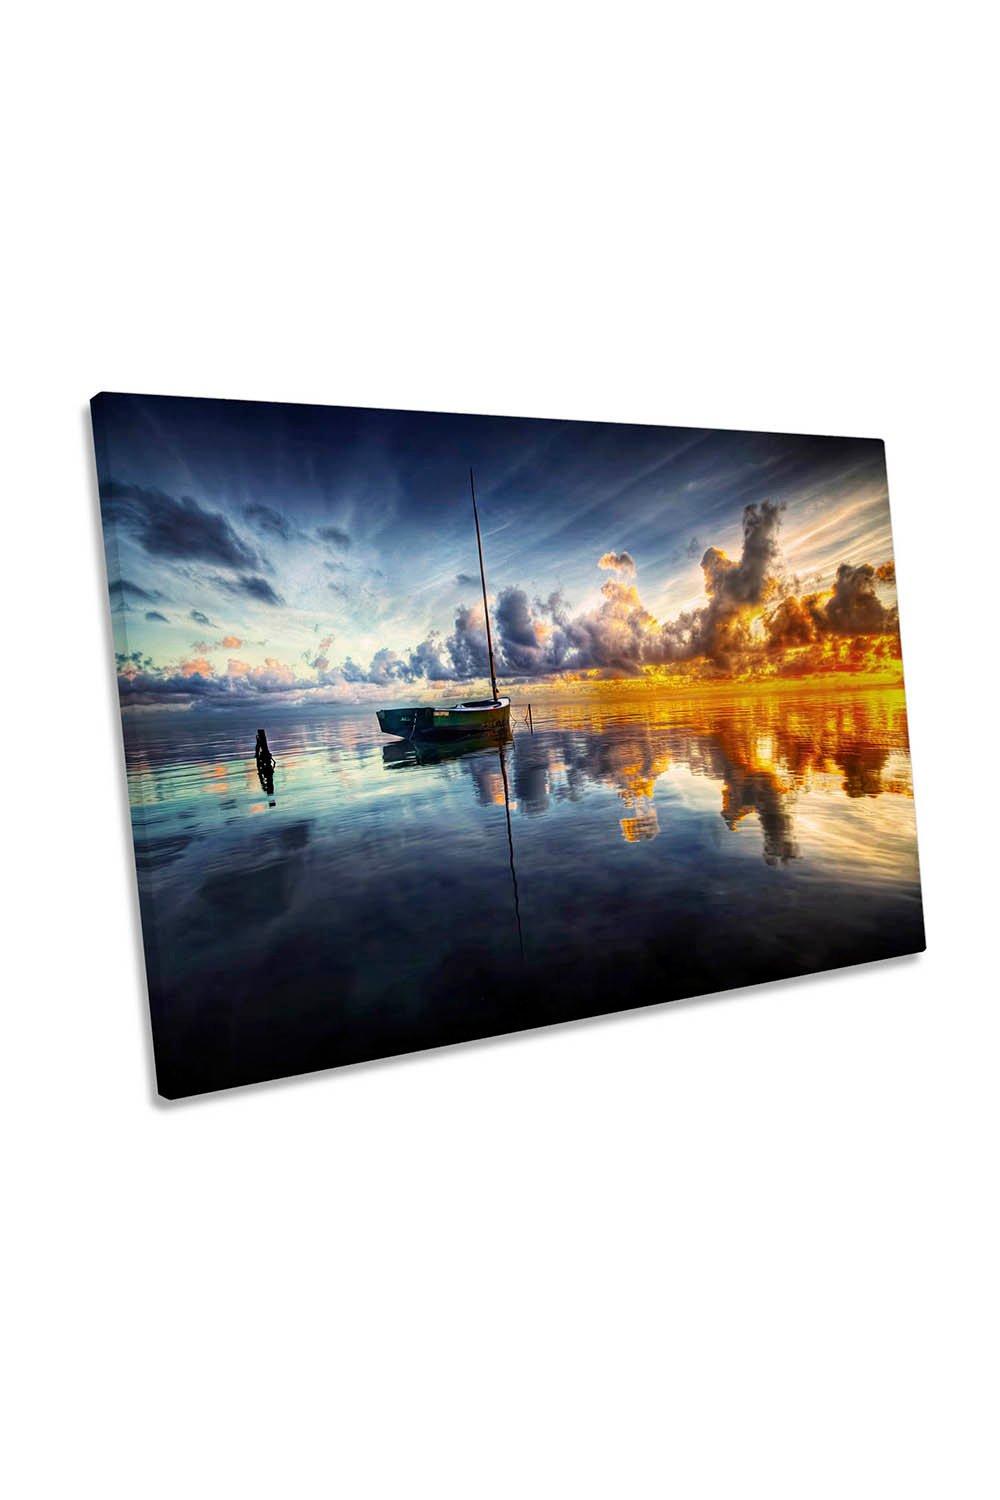 A Time For Reflection Sunset Boat Canvas Wall Art Picture Print